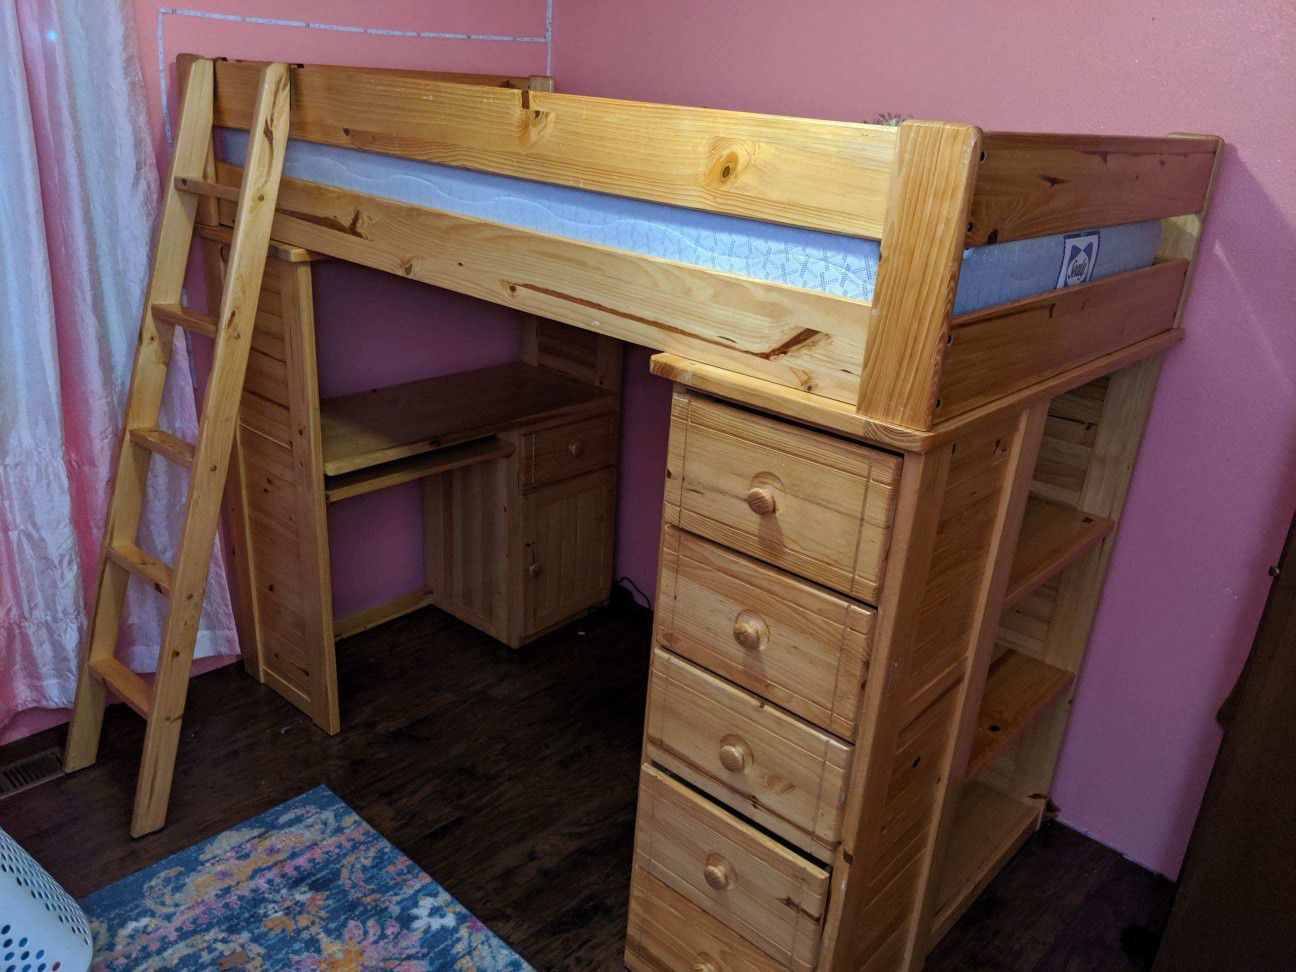 Twin loft bed with desk, drawers and book shelf.